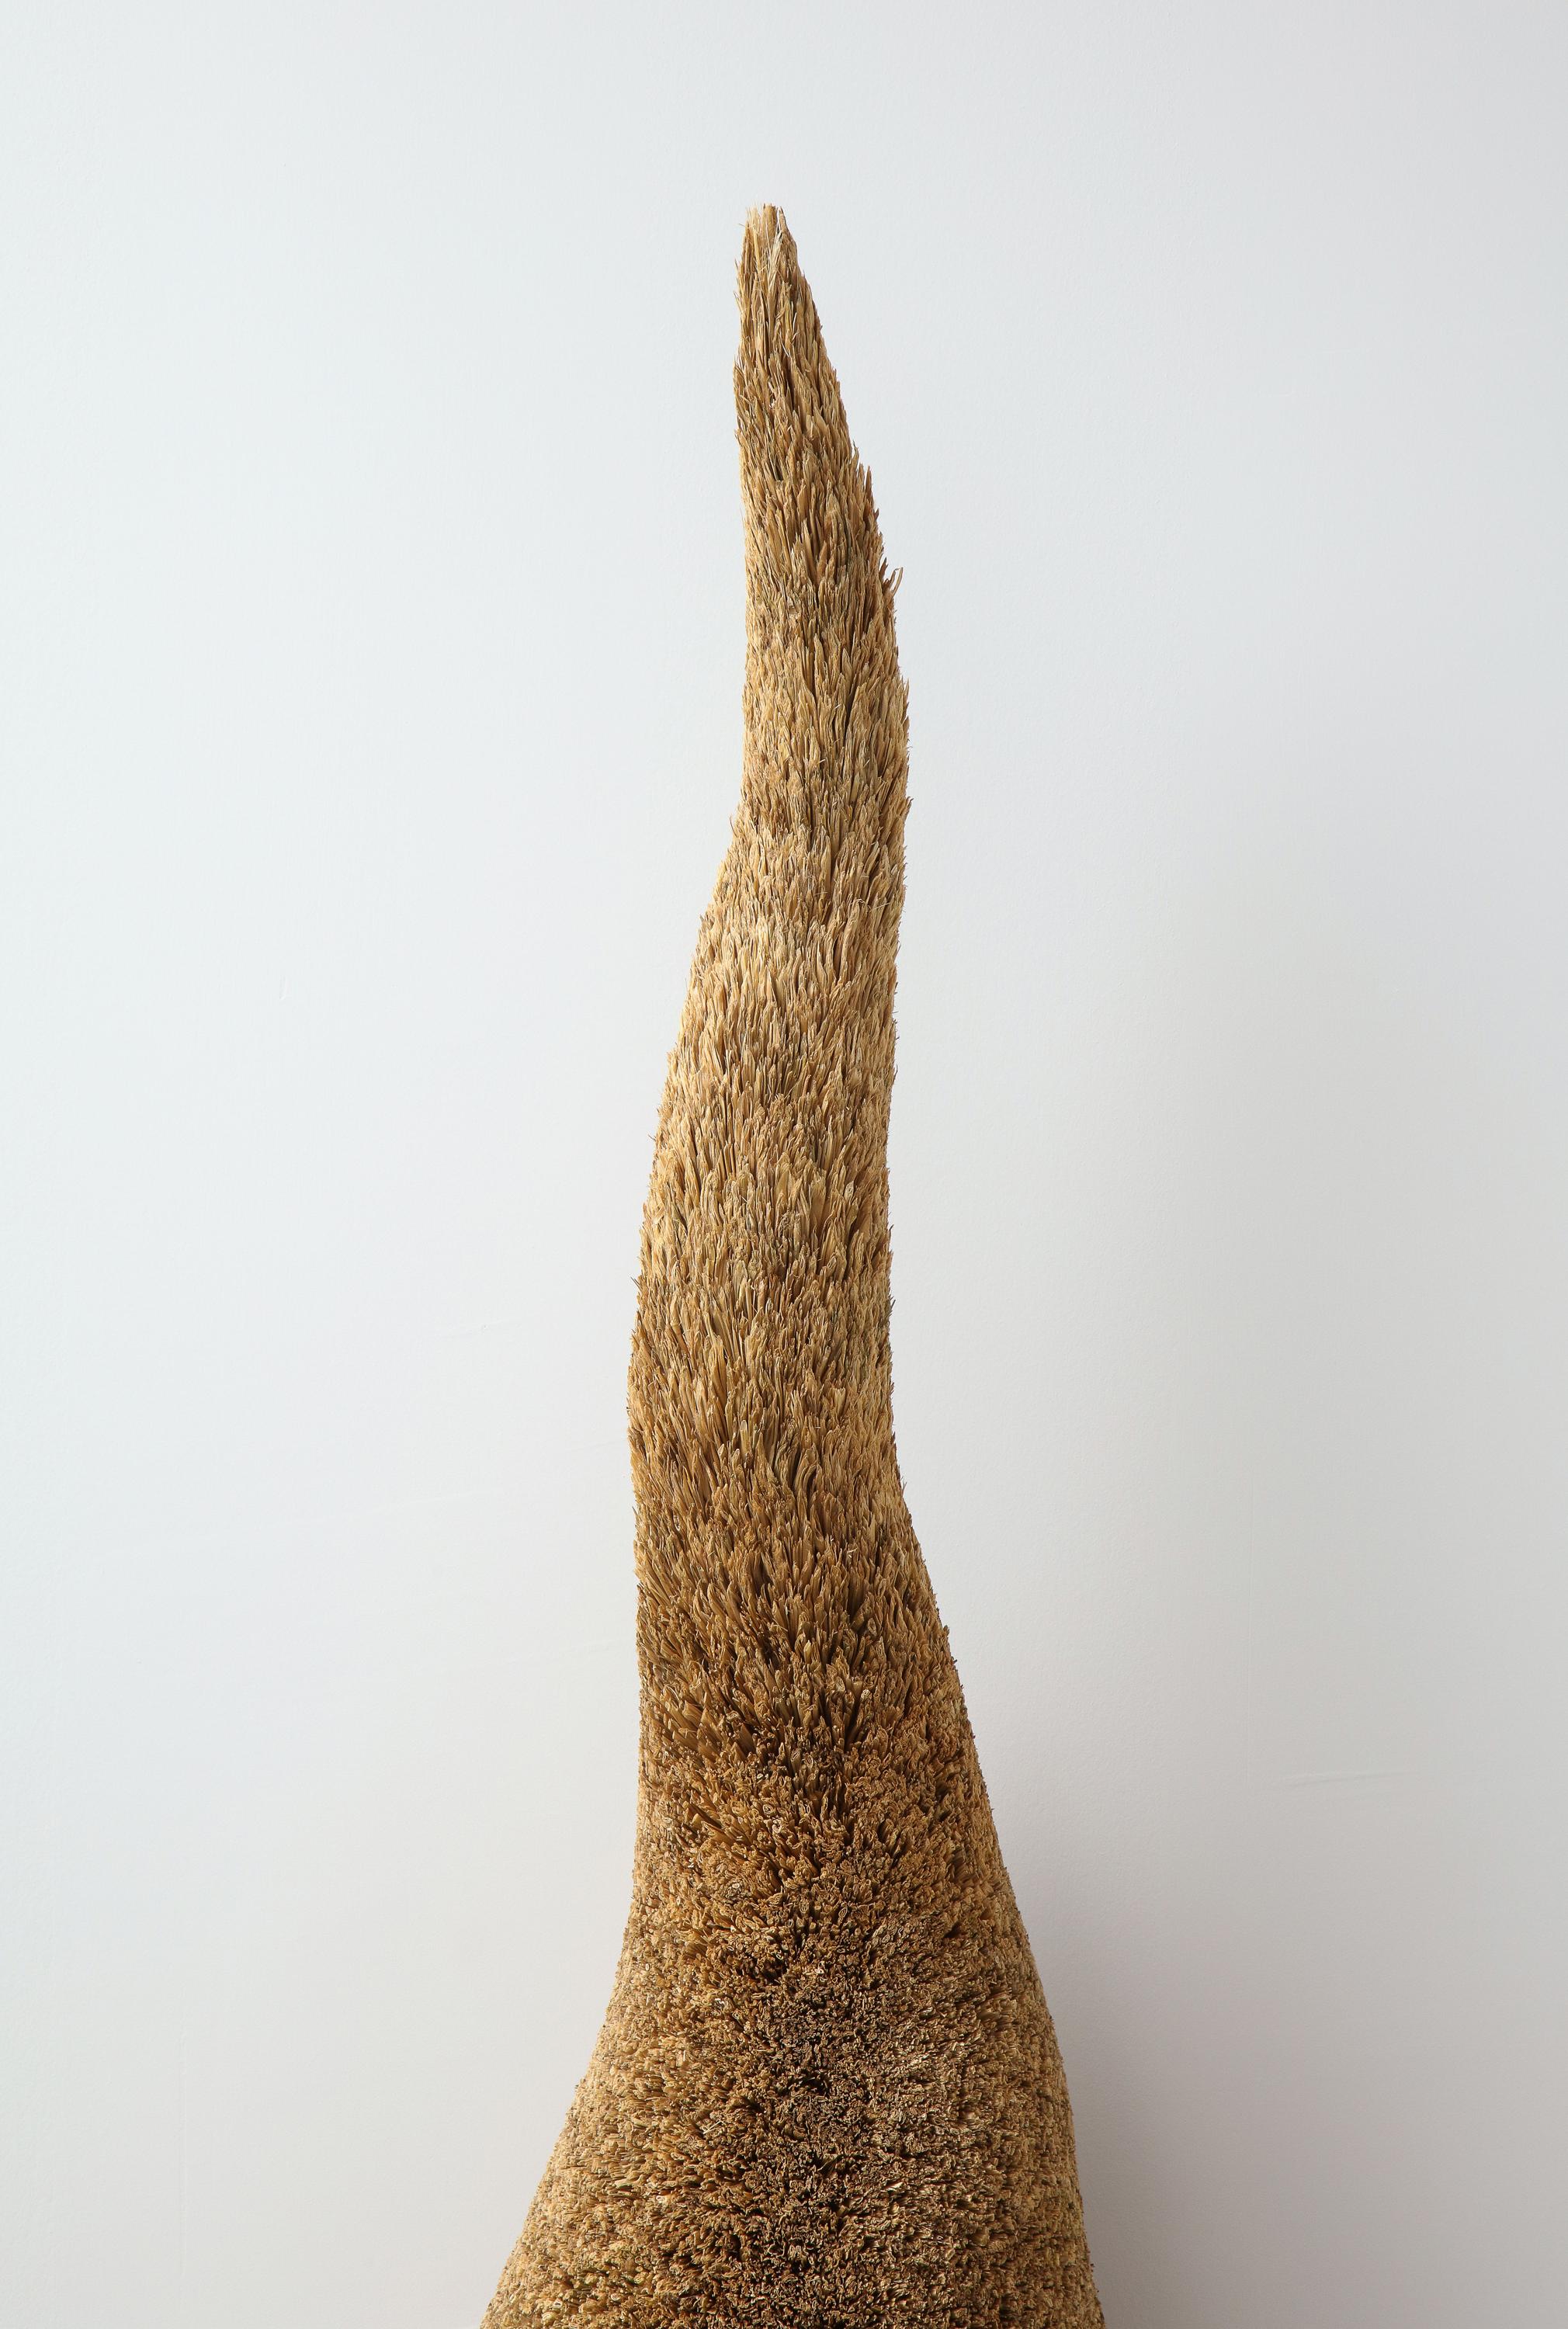 Uro #2 (Fox Tail), 2020
Rice stalks, epoxy resin, cotton cloth, and cashew lacquer.
Measurements: 47 x 15 x 18.5 in.
 